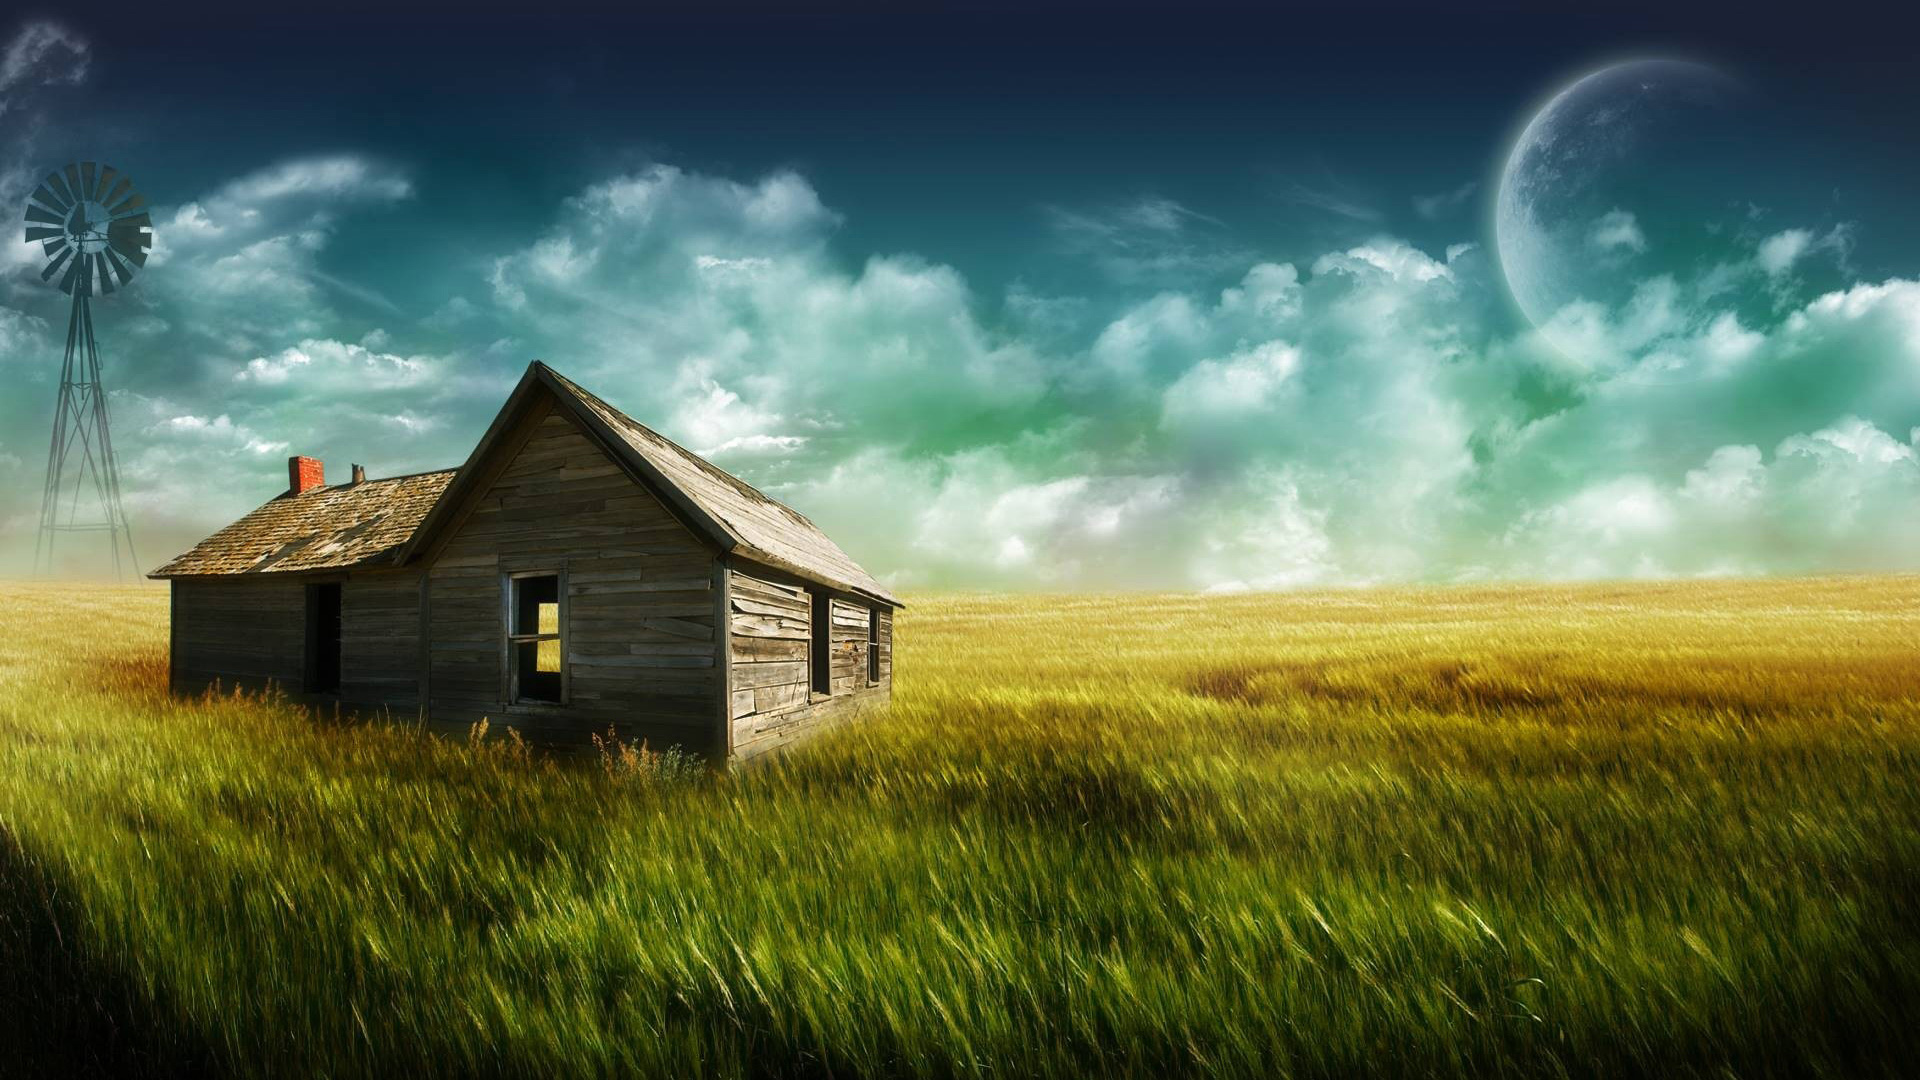 1080p Wallpaper High Definition The Farm House HD Pictures